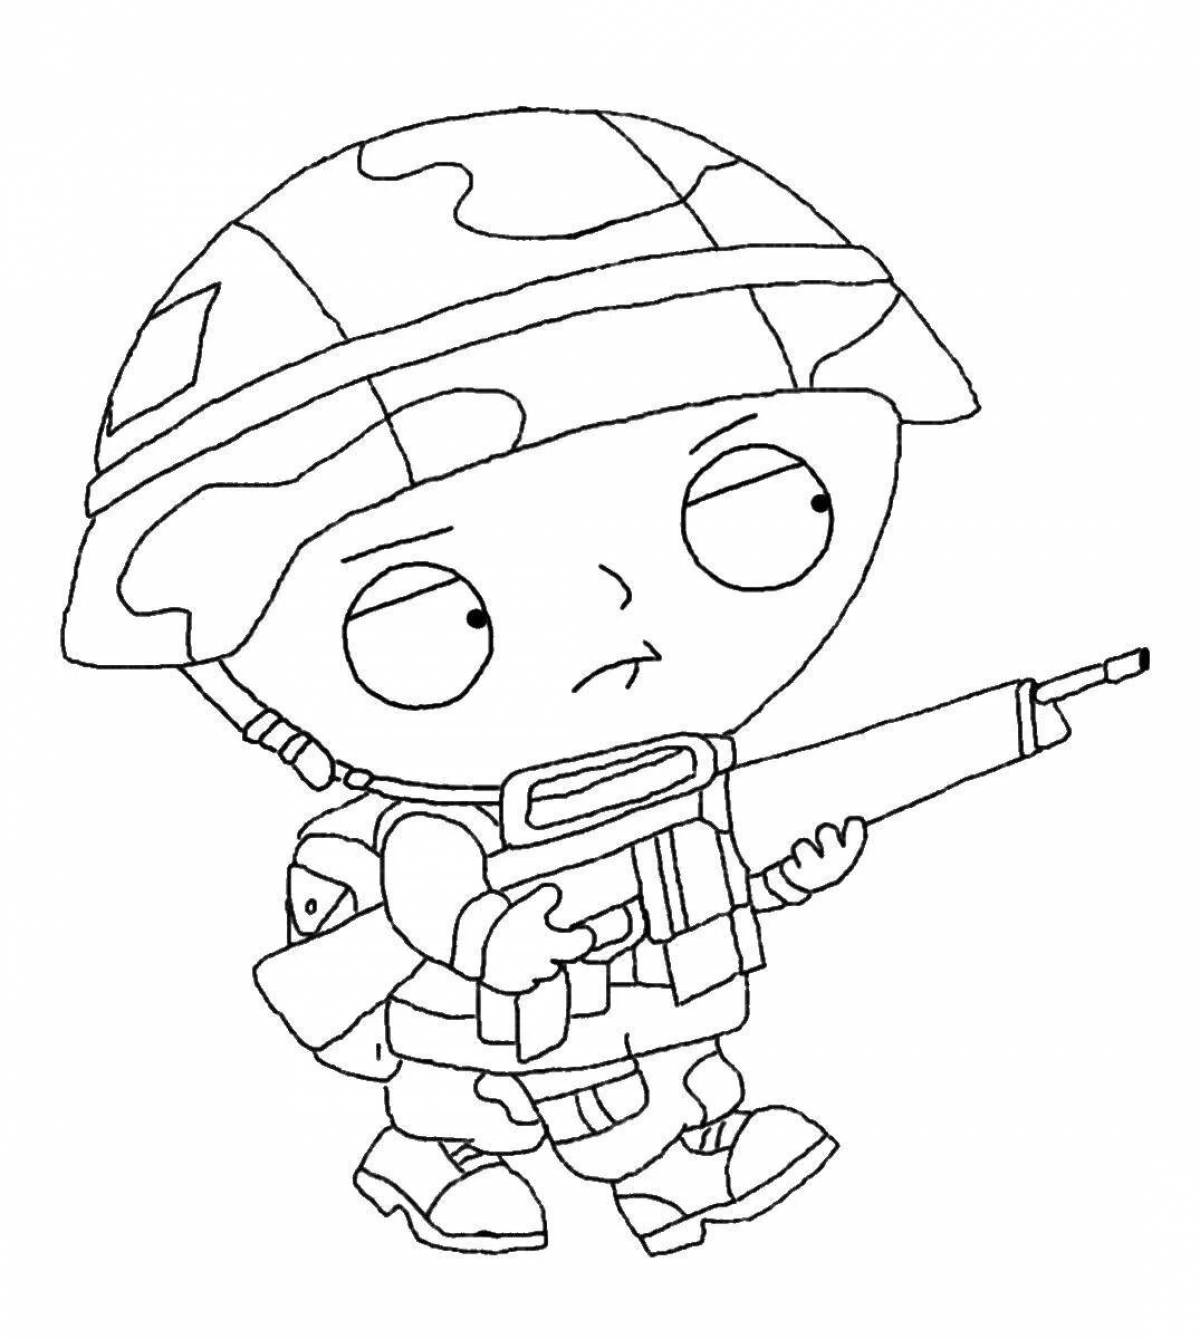 Soldier small #1